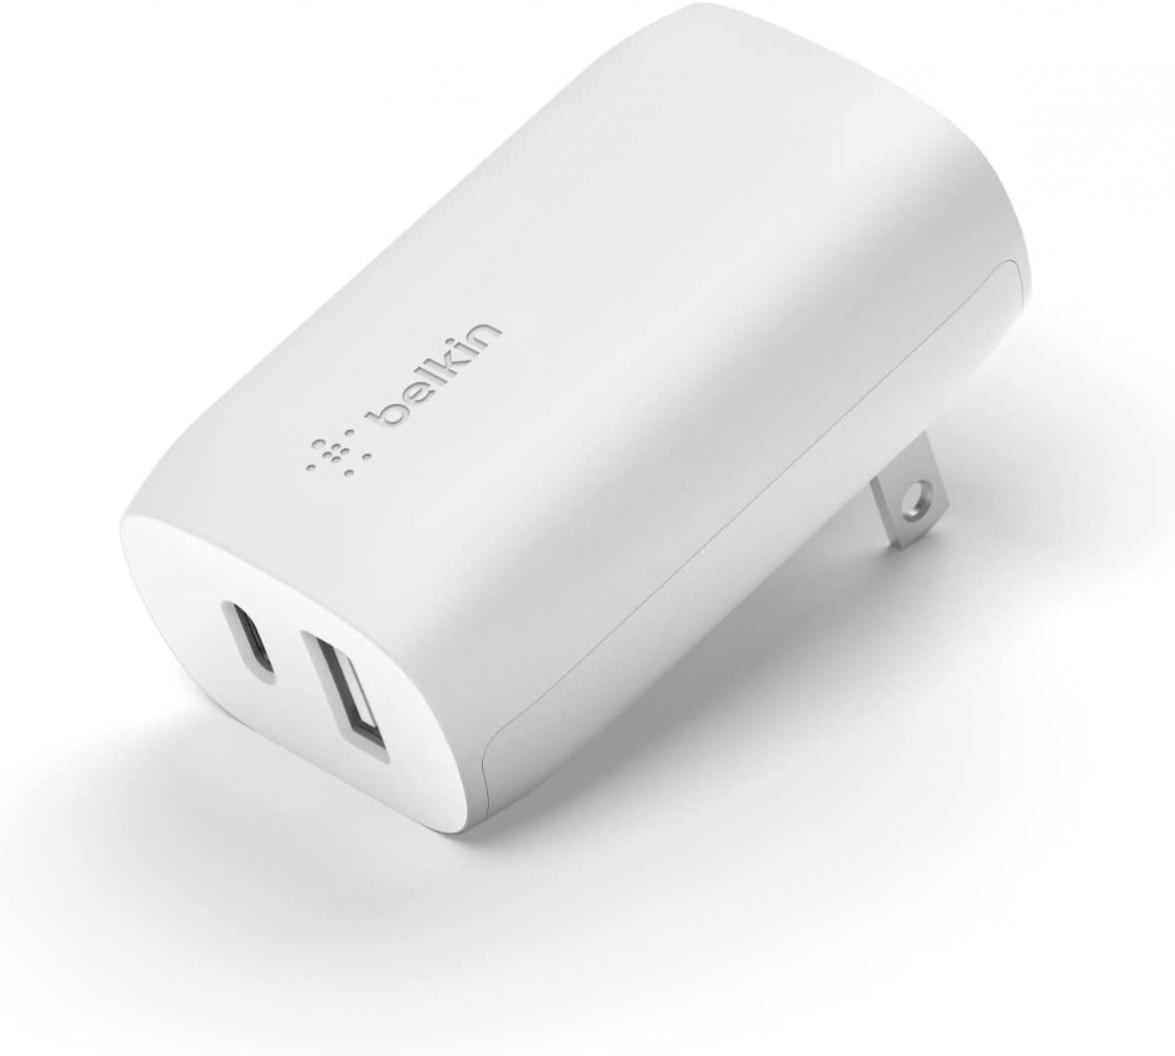 Belkin 37W USB Type C PPS PD Dual Port Wall Phone Charger, Power Delivery 25W USB C Port and 12W USB A Port for Fast Charging Galaxy S22, S21, Ultra, Plus, Note 20, iPhone and More